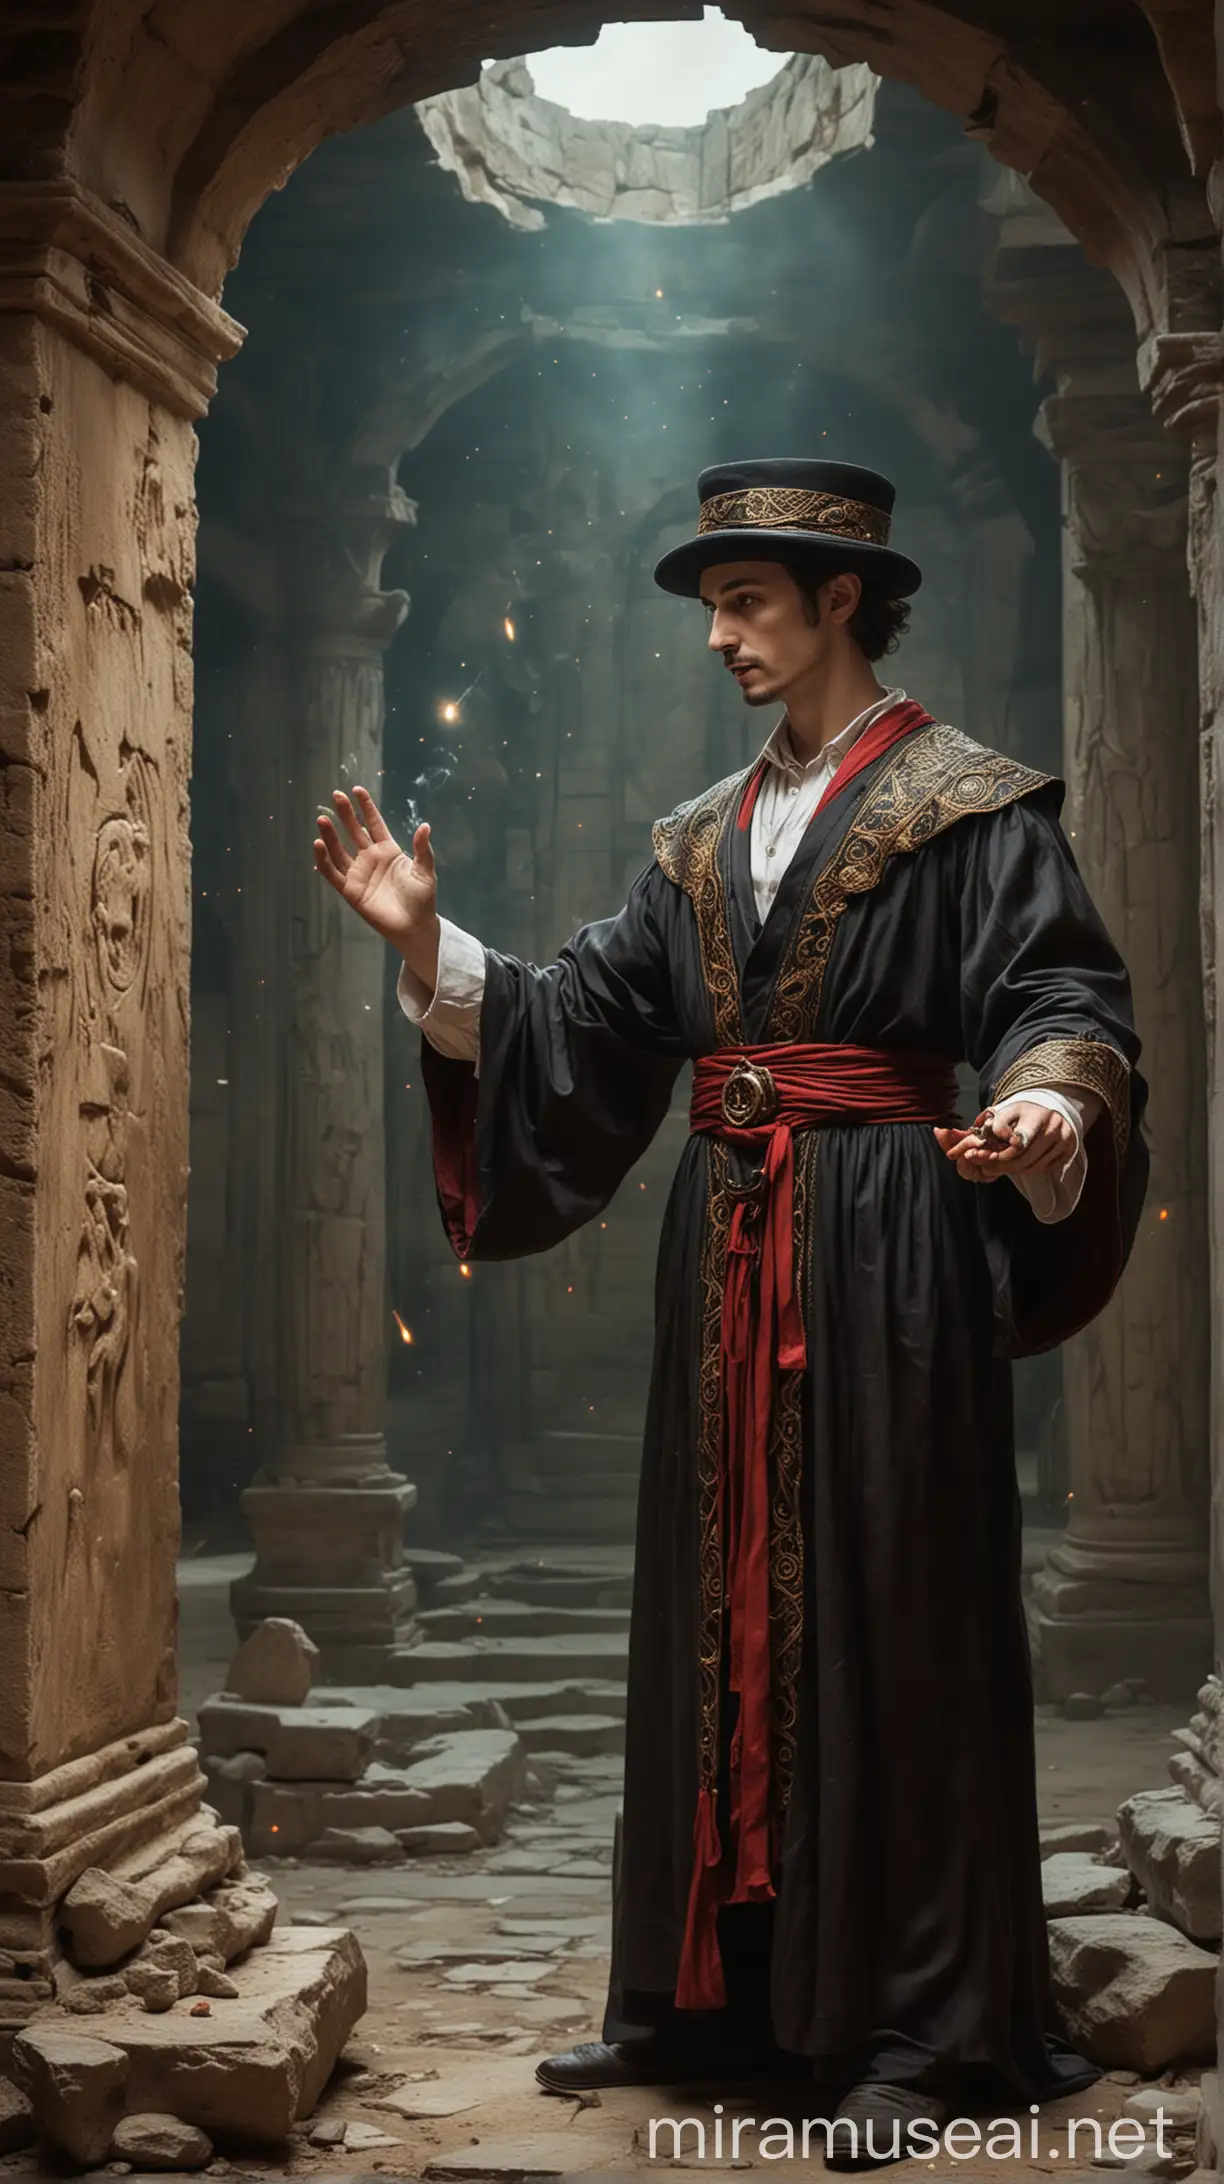 A magician in ancient world